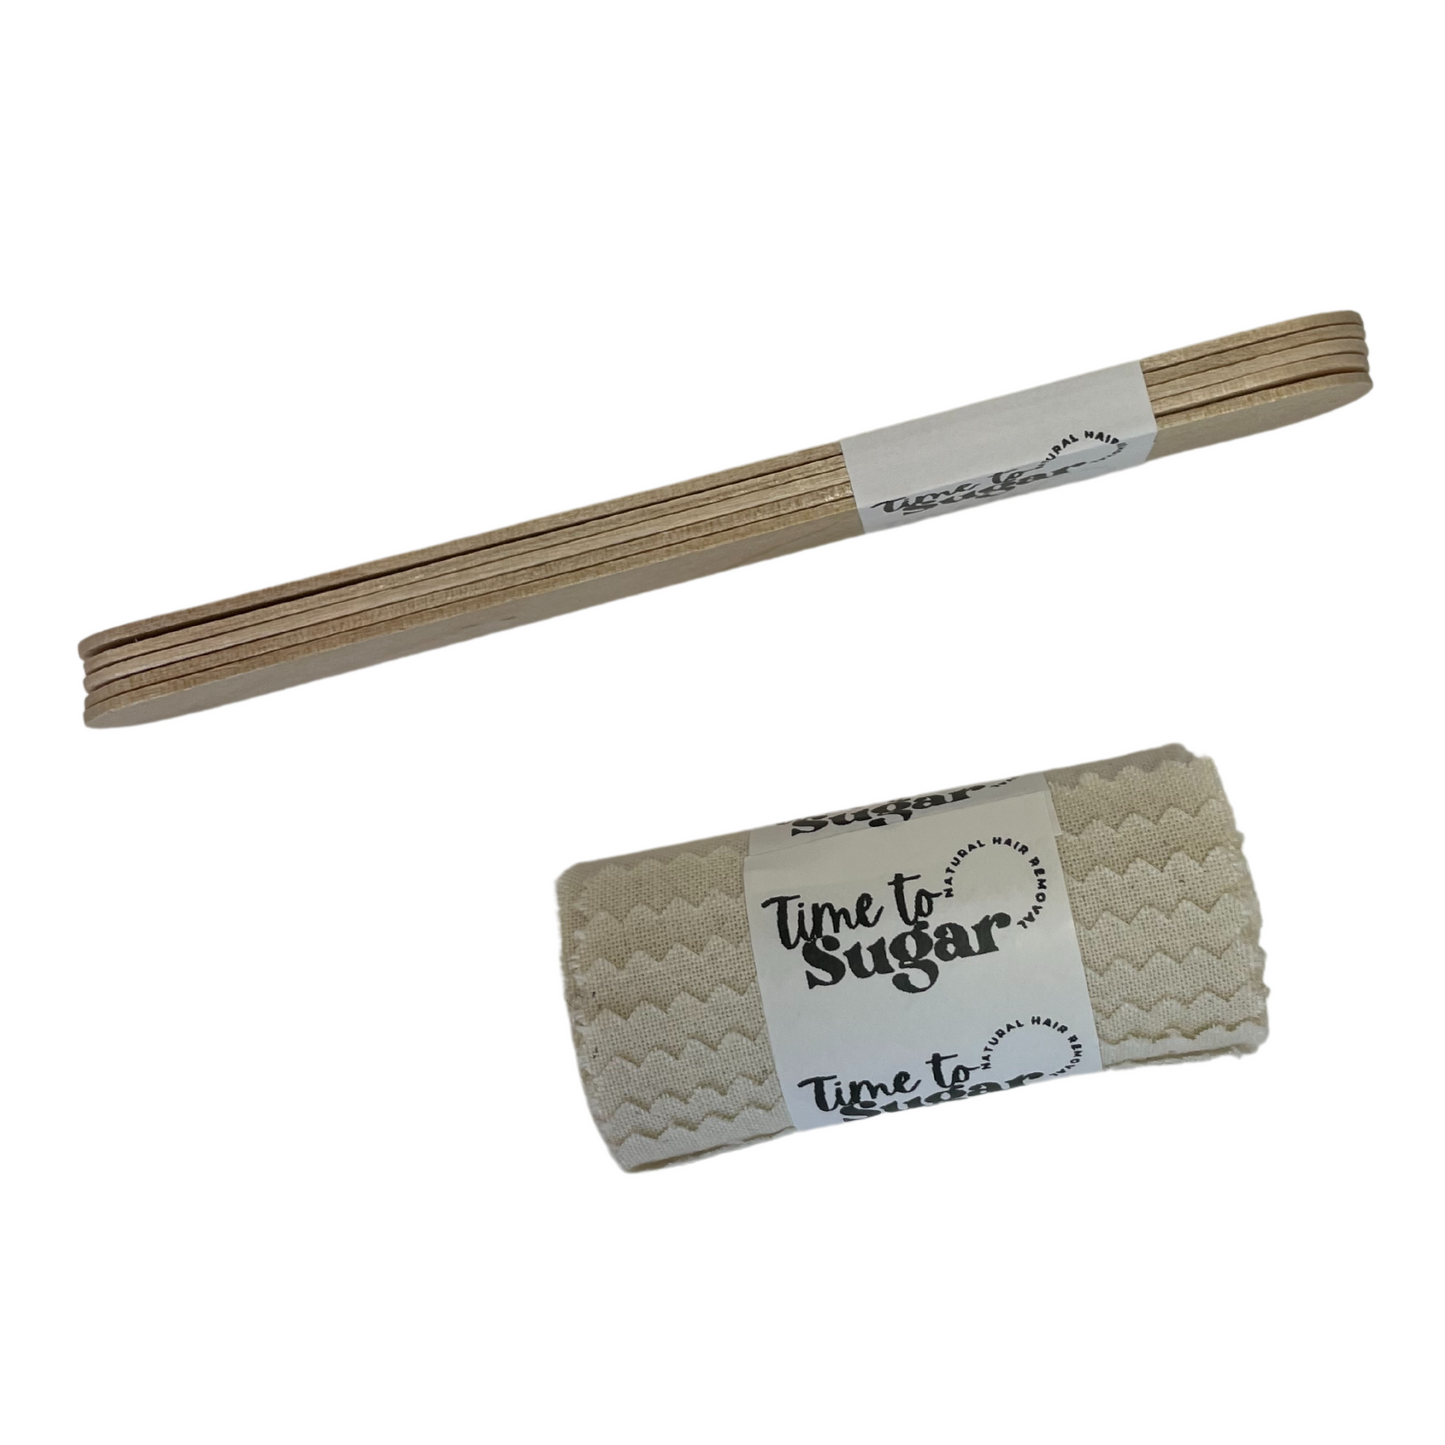 Reusable cotton strips and wooden spatulas with Time To Sugar logo